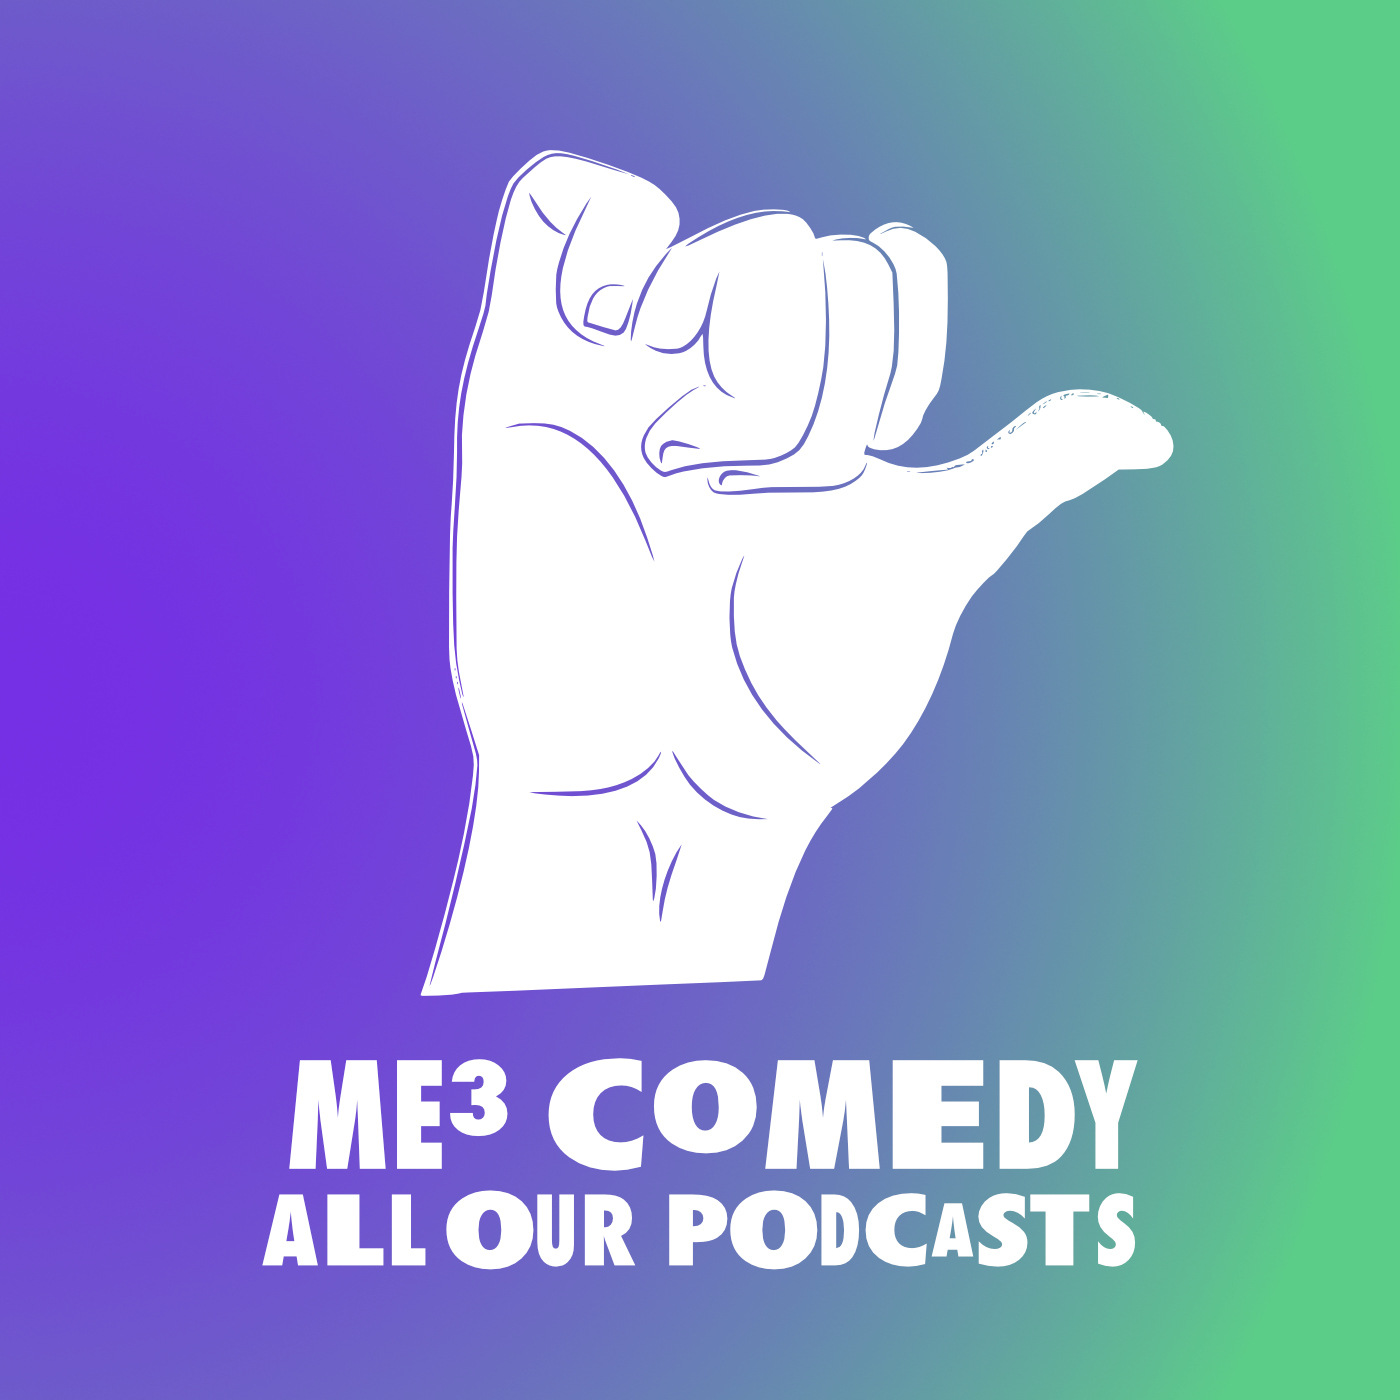 Me3 Comedy - All Podcasts